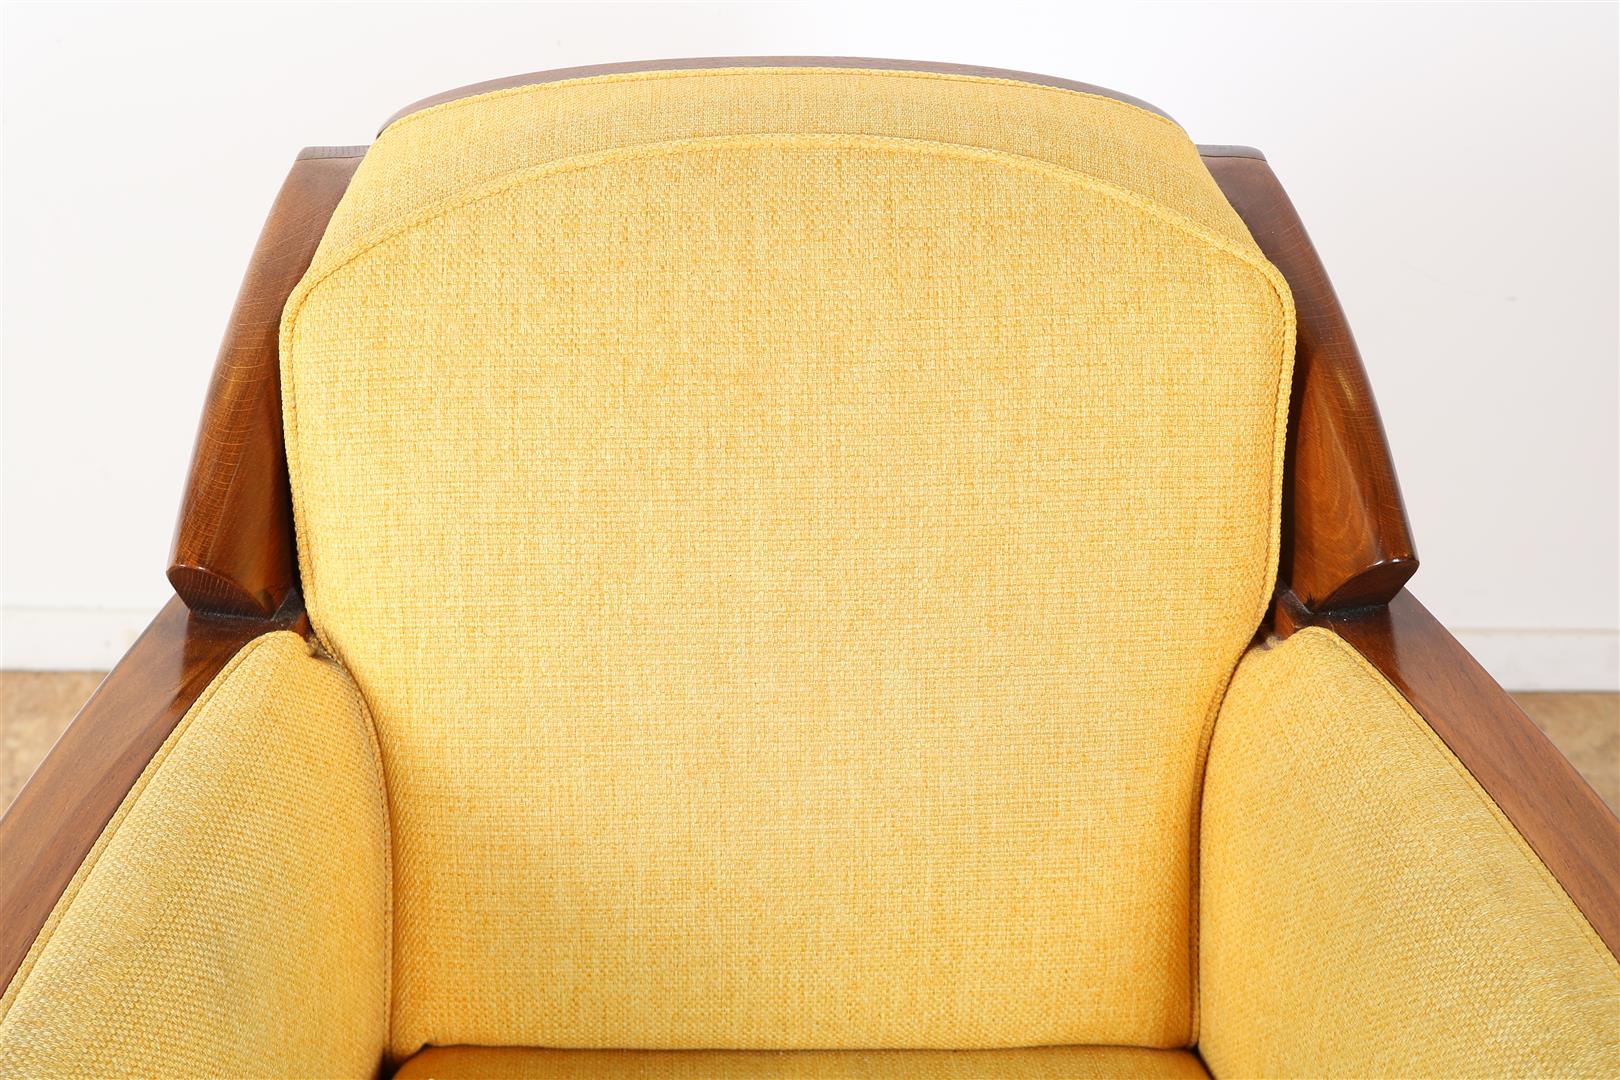 Oak Schuitema armchair with ocher yellow fabric upholstery (signs of use) - Image 2 of 5